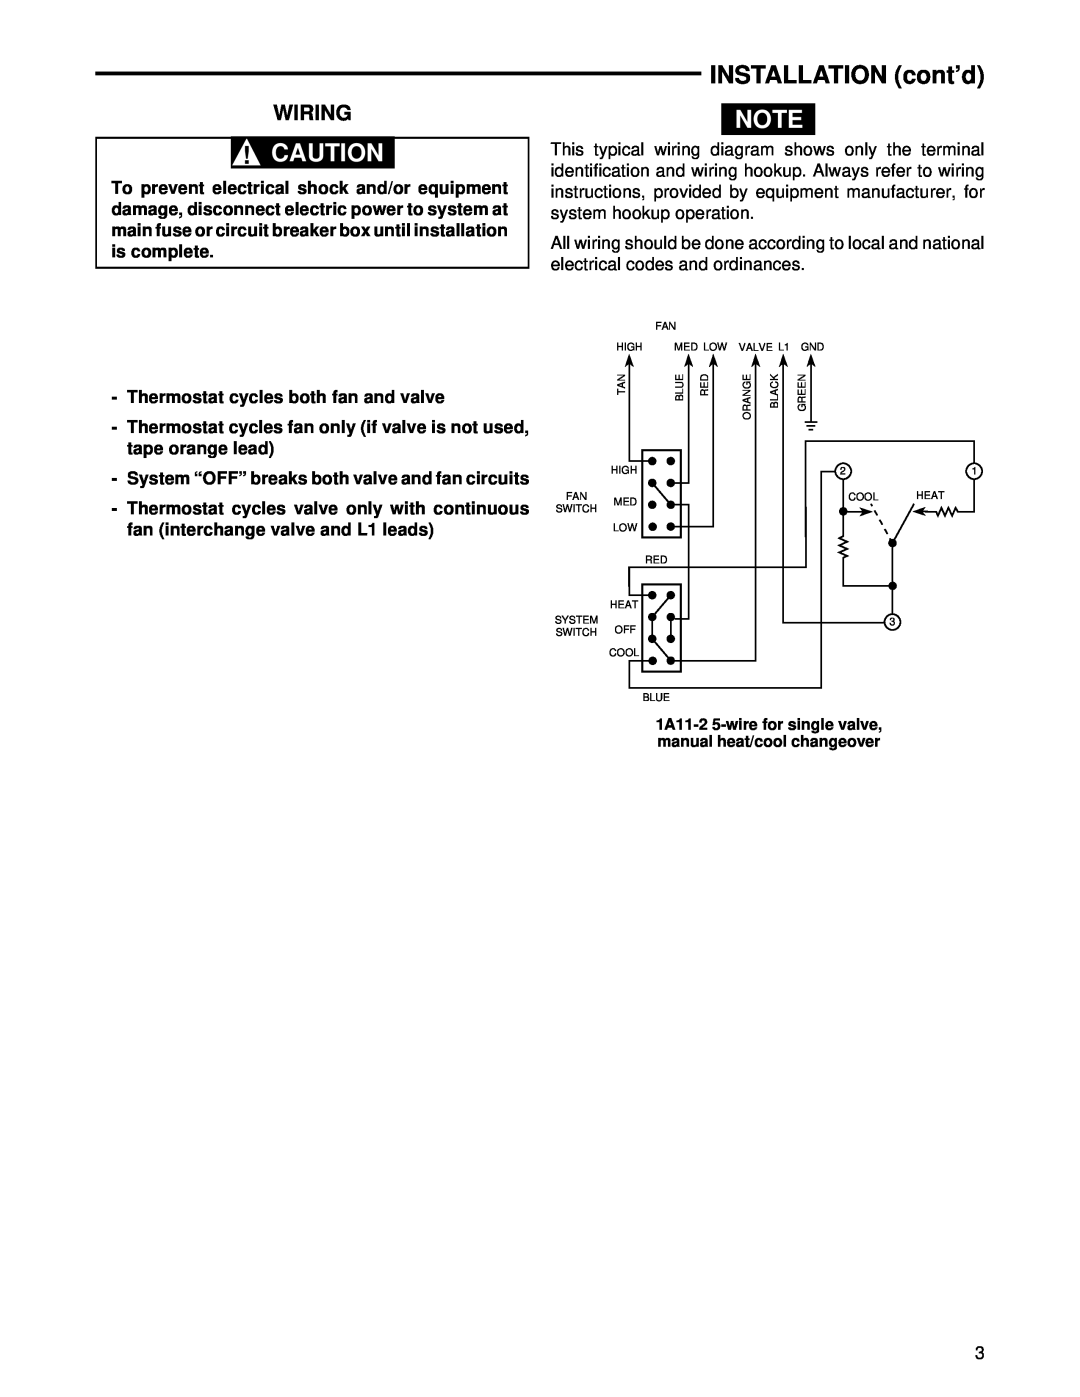 White Rodgers 1A11-2 installation instructions INSTALLATION cont’d, Wiring 